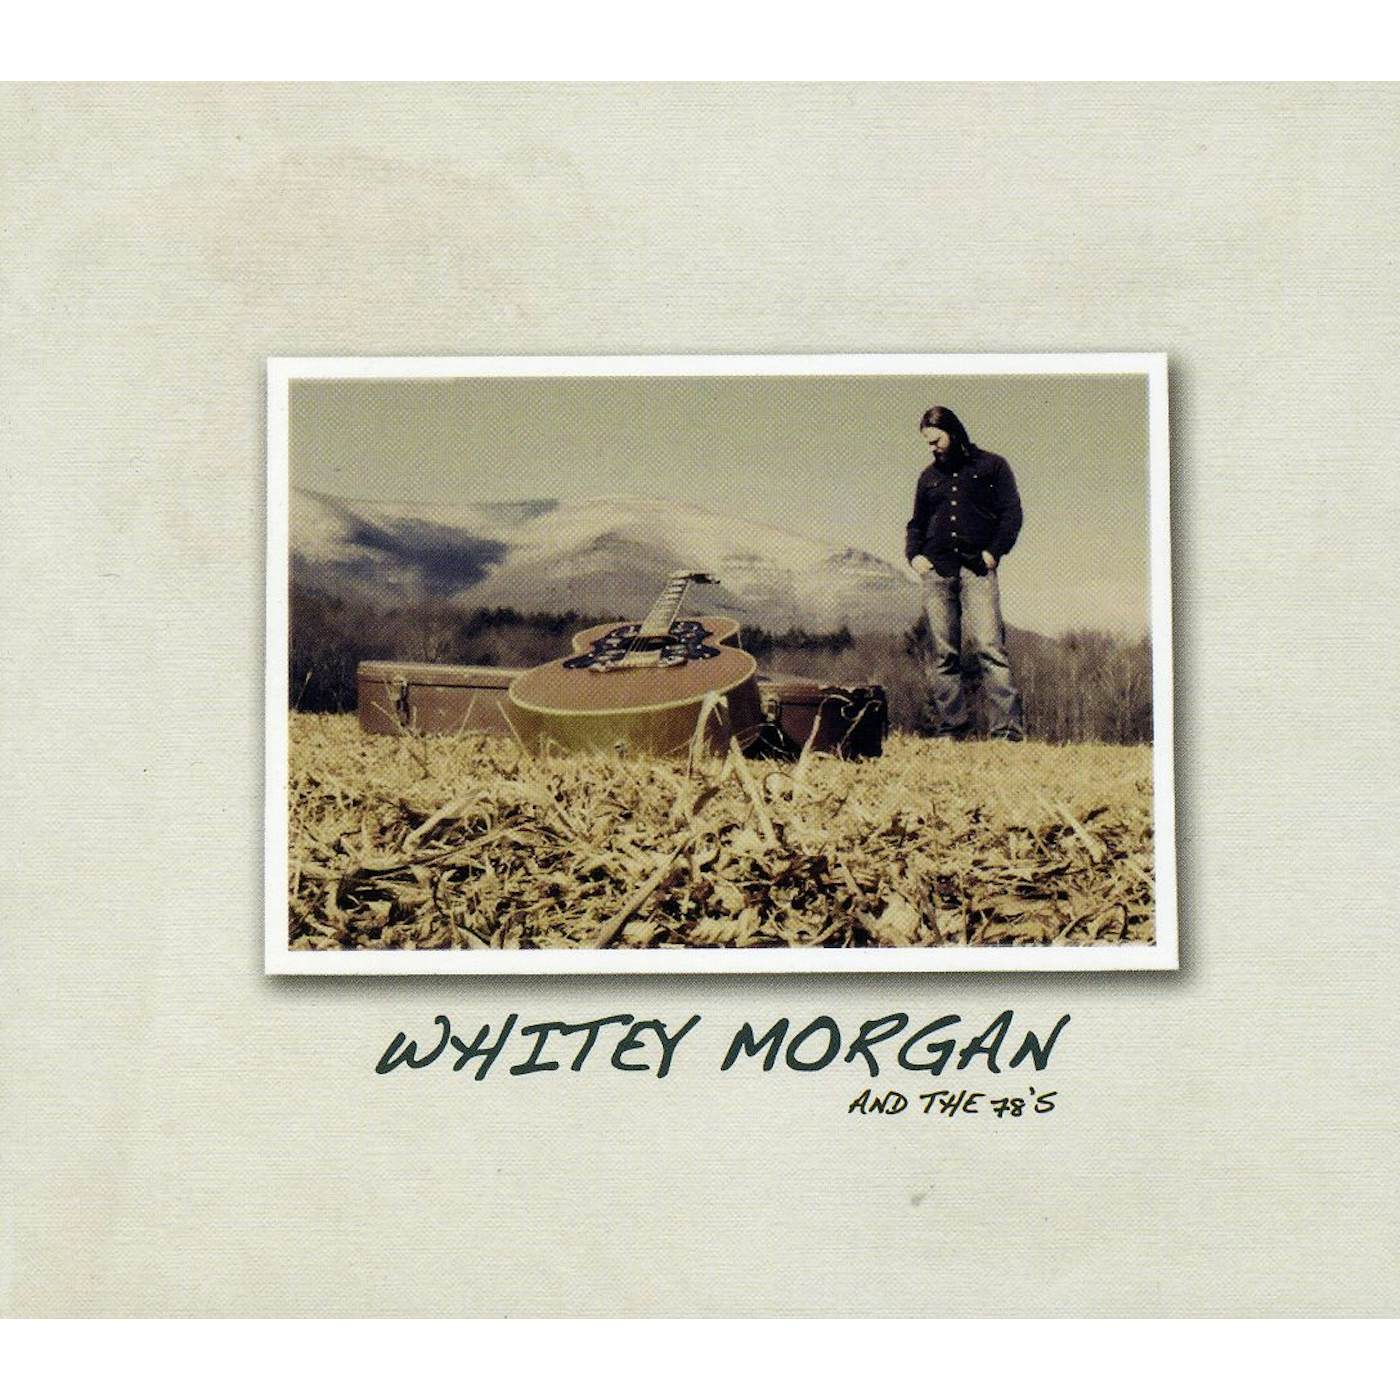 Whitey Morgan and the 78's CD